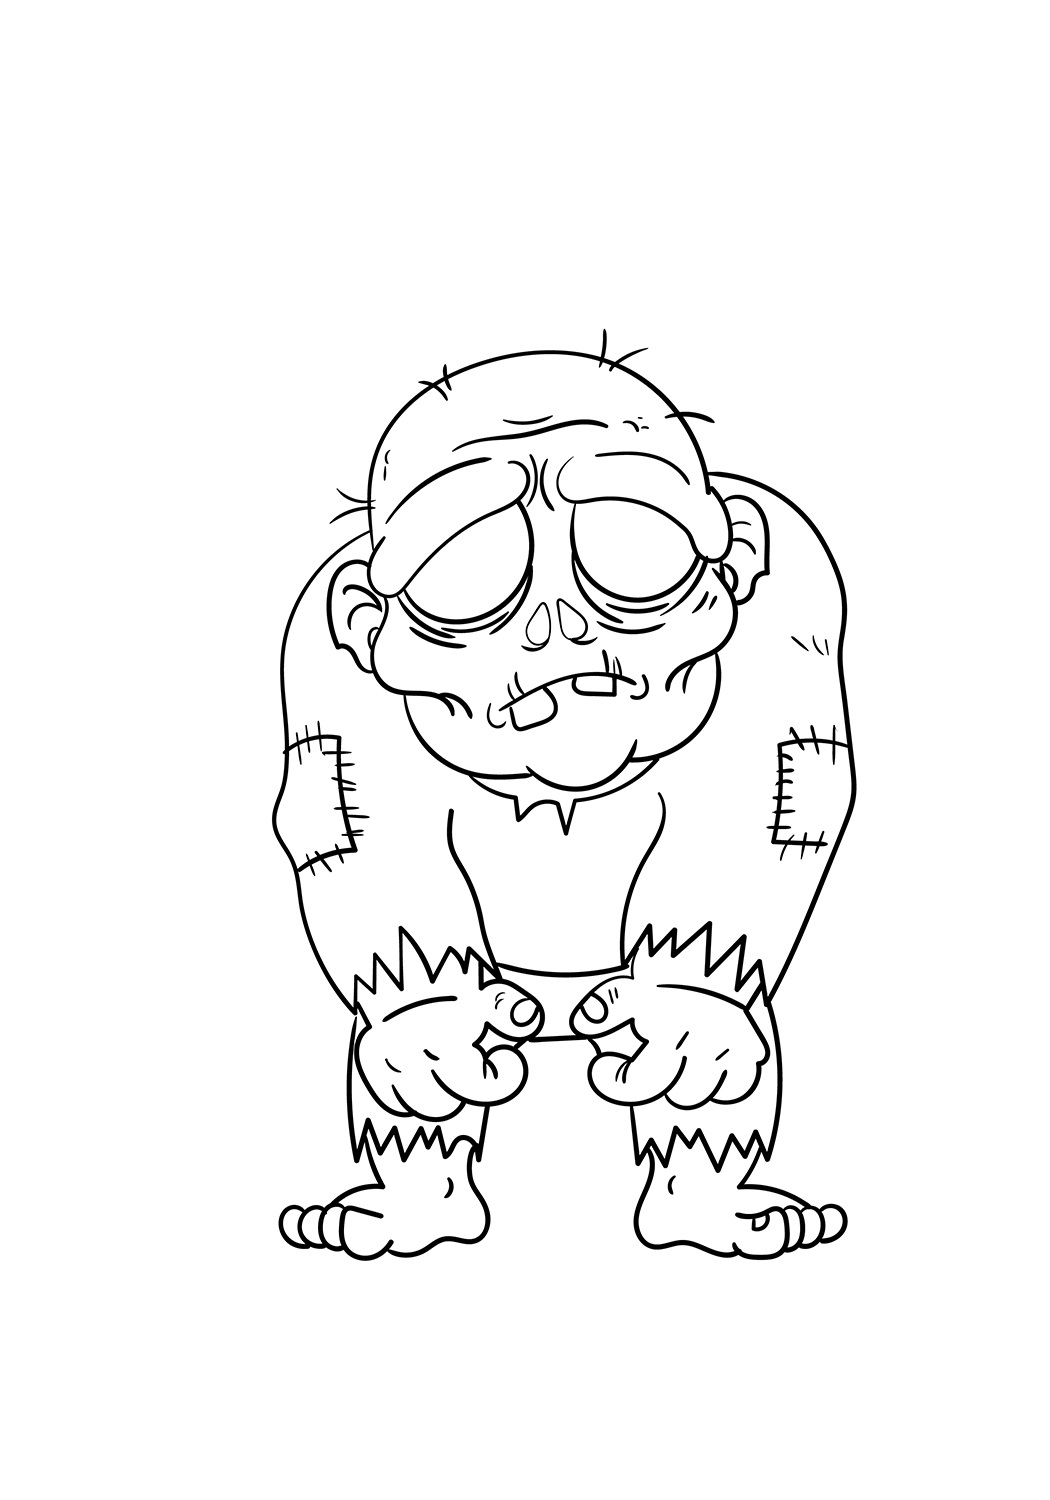 Hideous Zombie Coloring Page - Free Printable Coloring ...